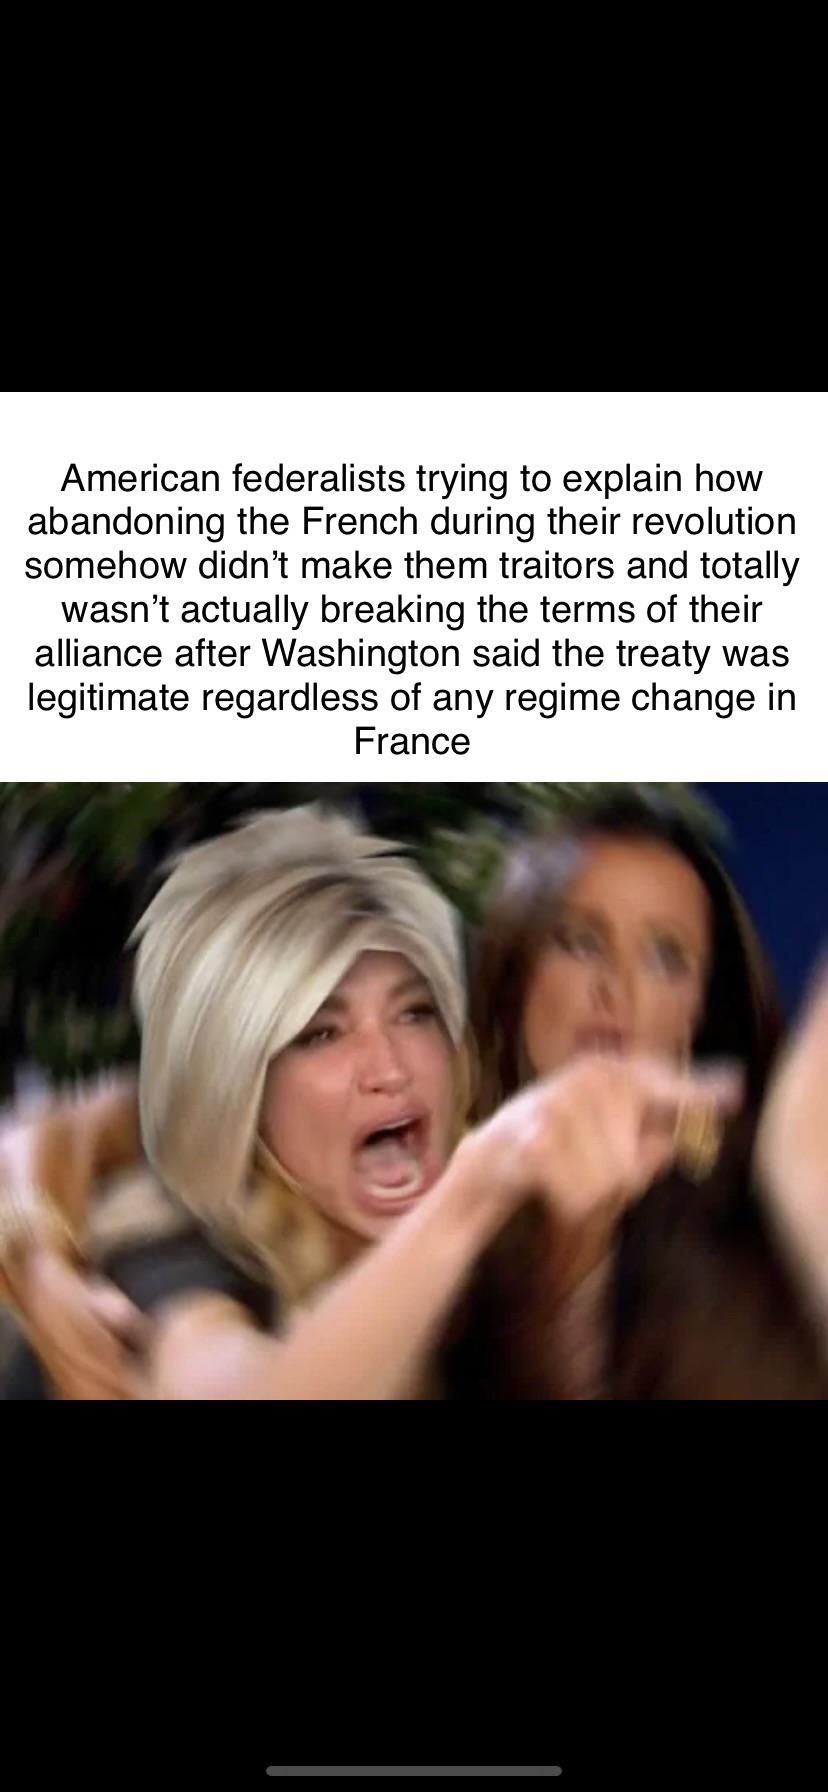 Thousands of Americans were rioting in favour of joining France. But if the devil works hard the federalists worked harder…..